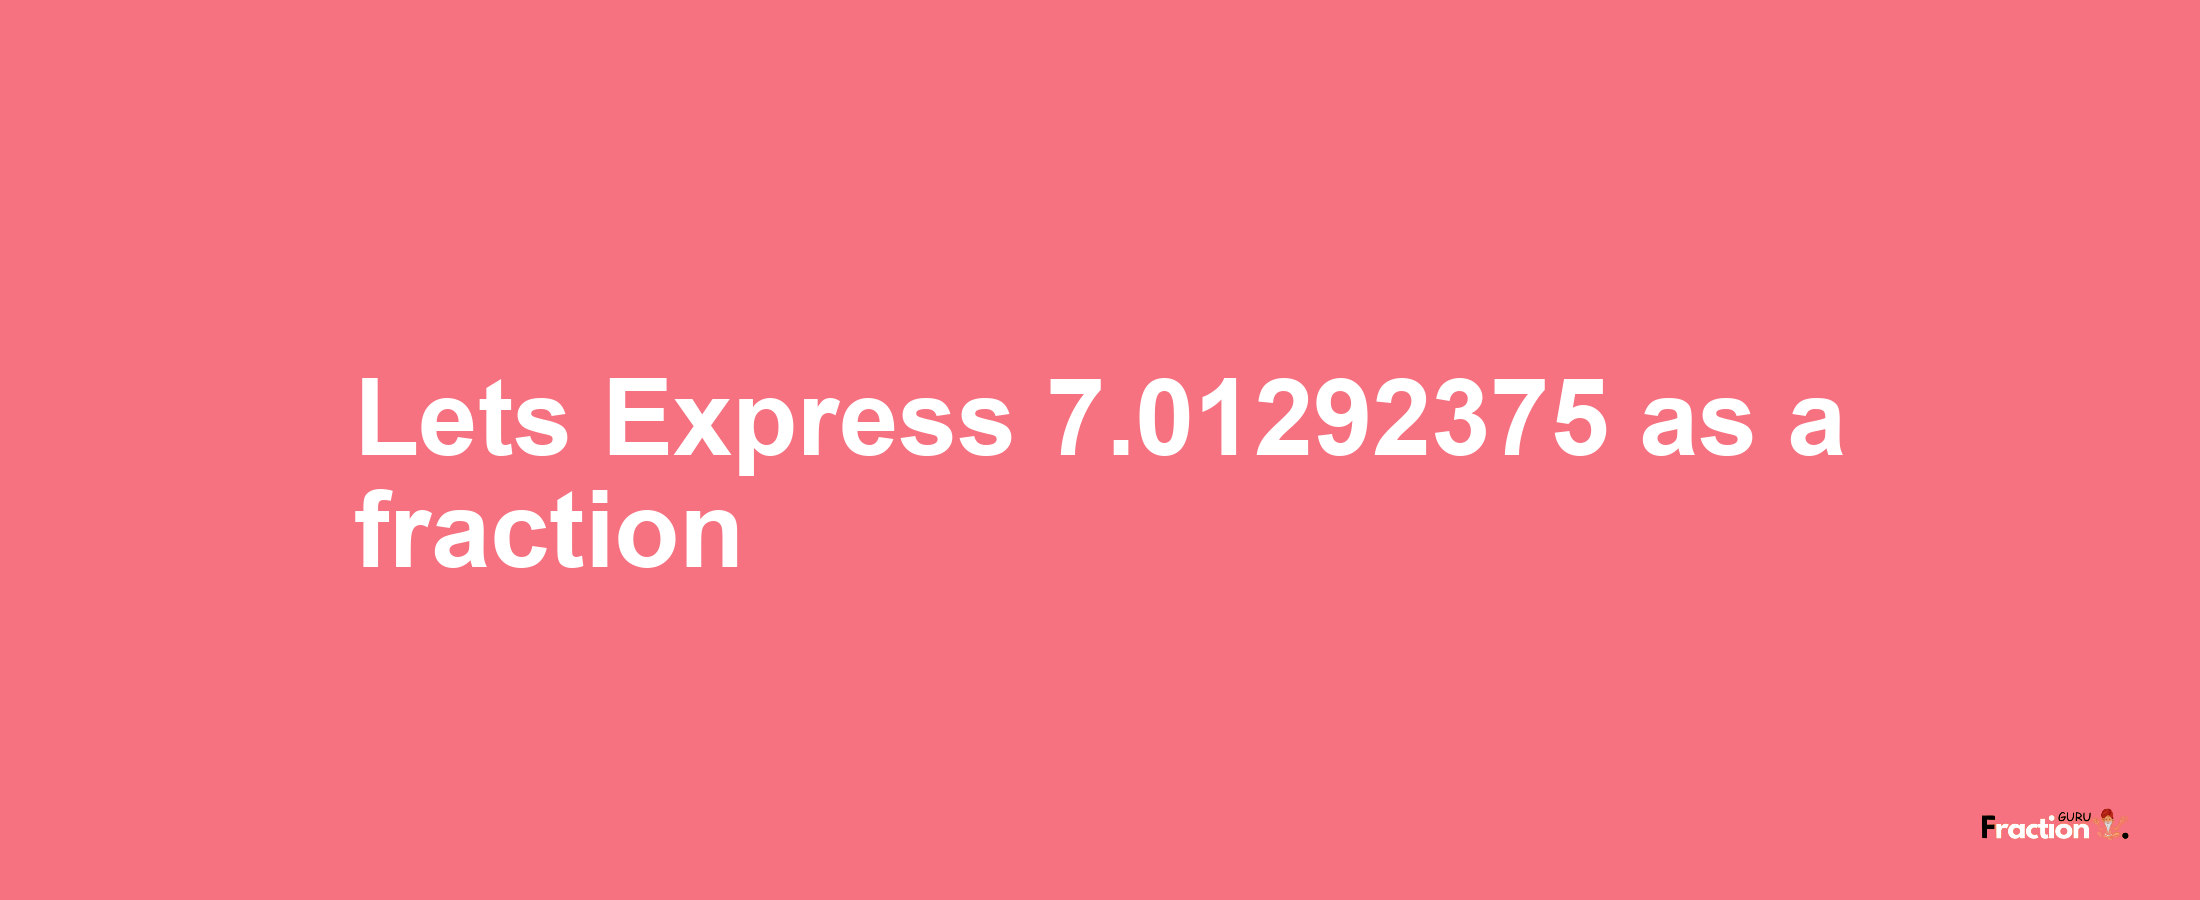 Lets Express 7.01292375 as afraction